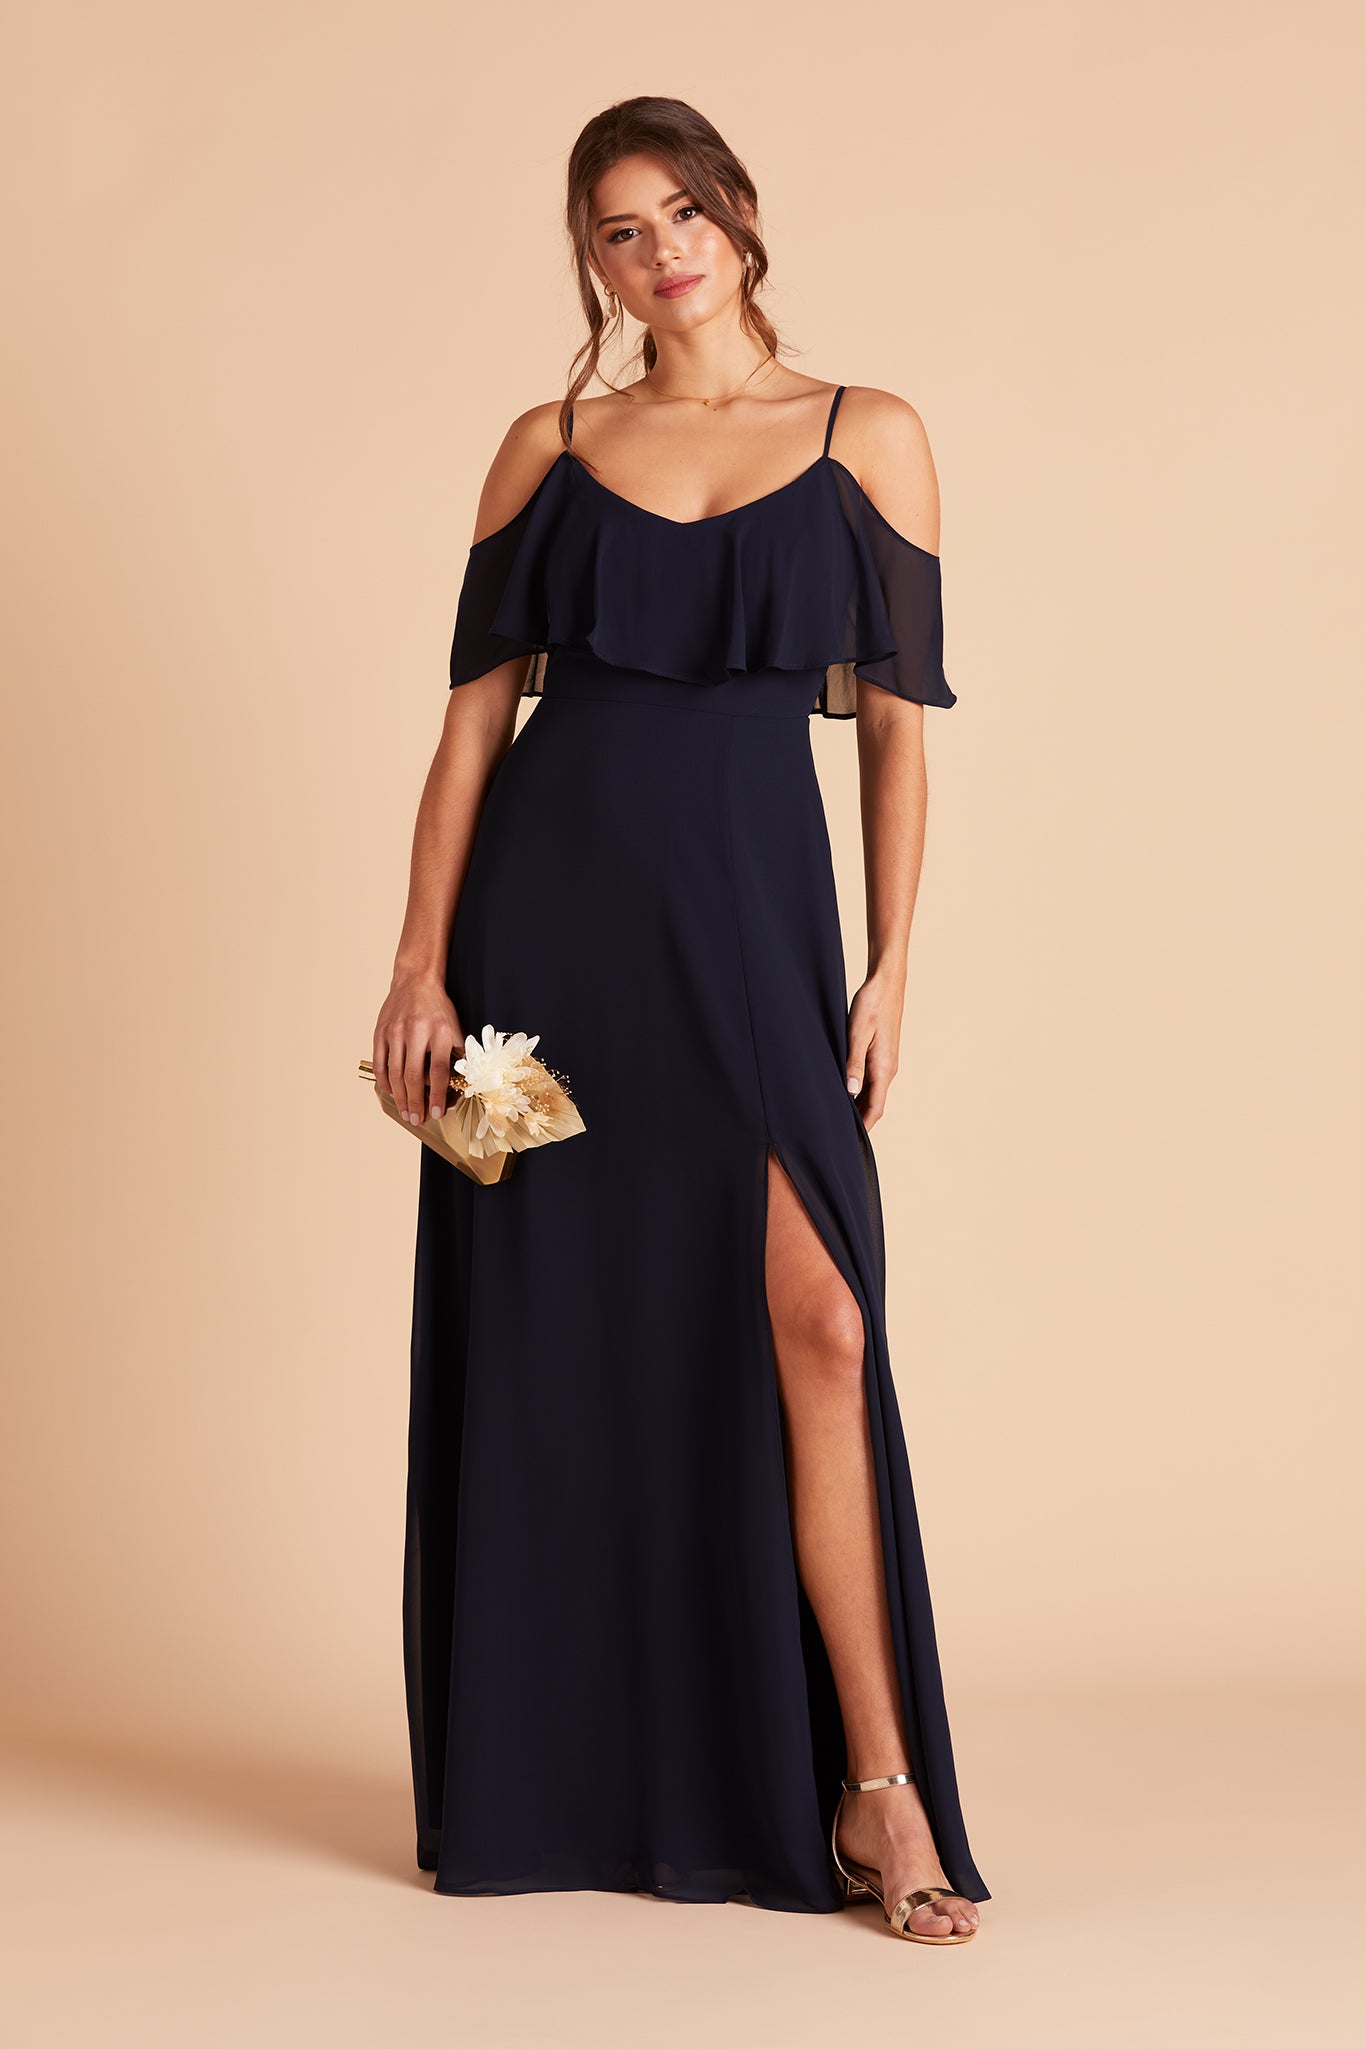 Jane convertible bridesmaid dress with slit in navy blue chiffon by Birdy Grey, front view